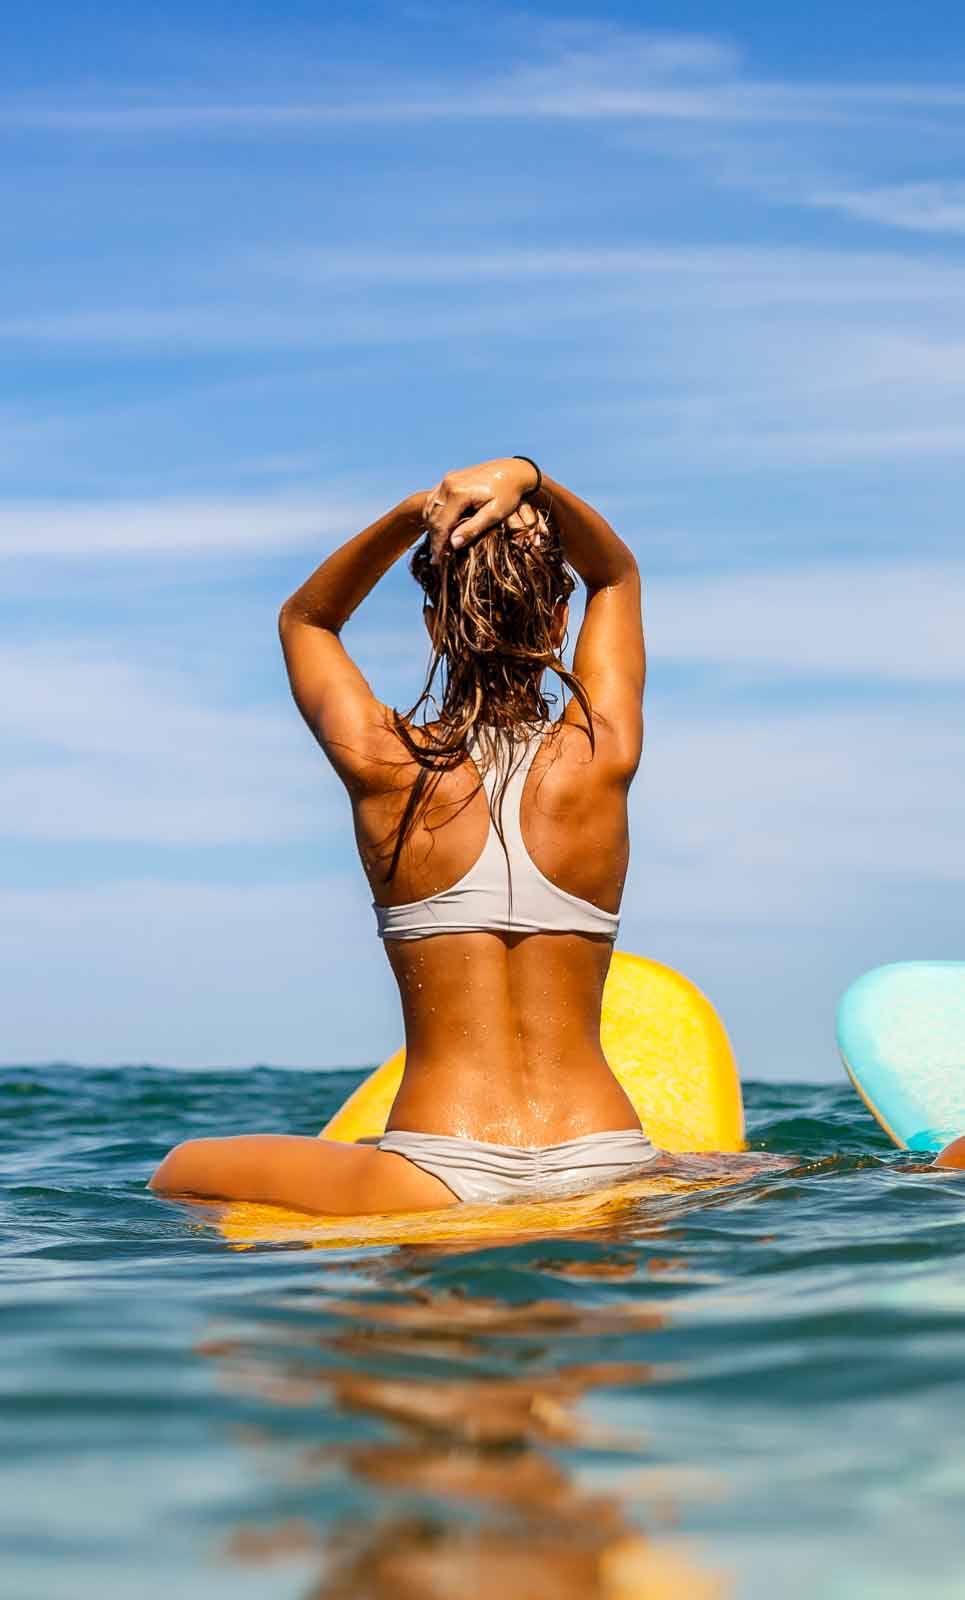 Your online surf shop: we are specialist in surf and bodyboard 